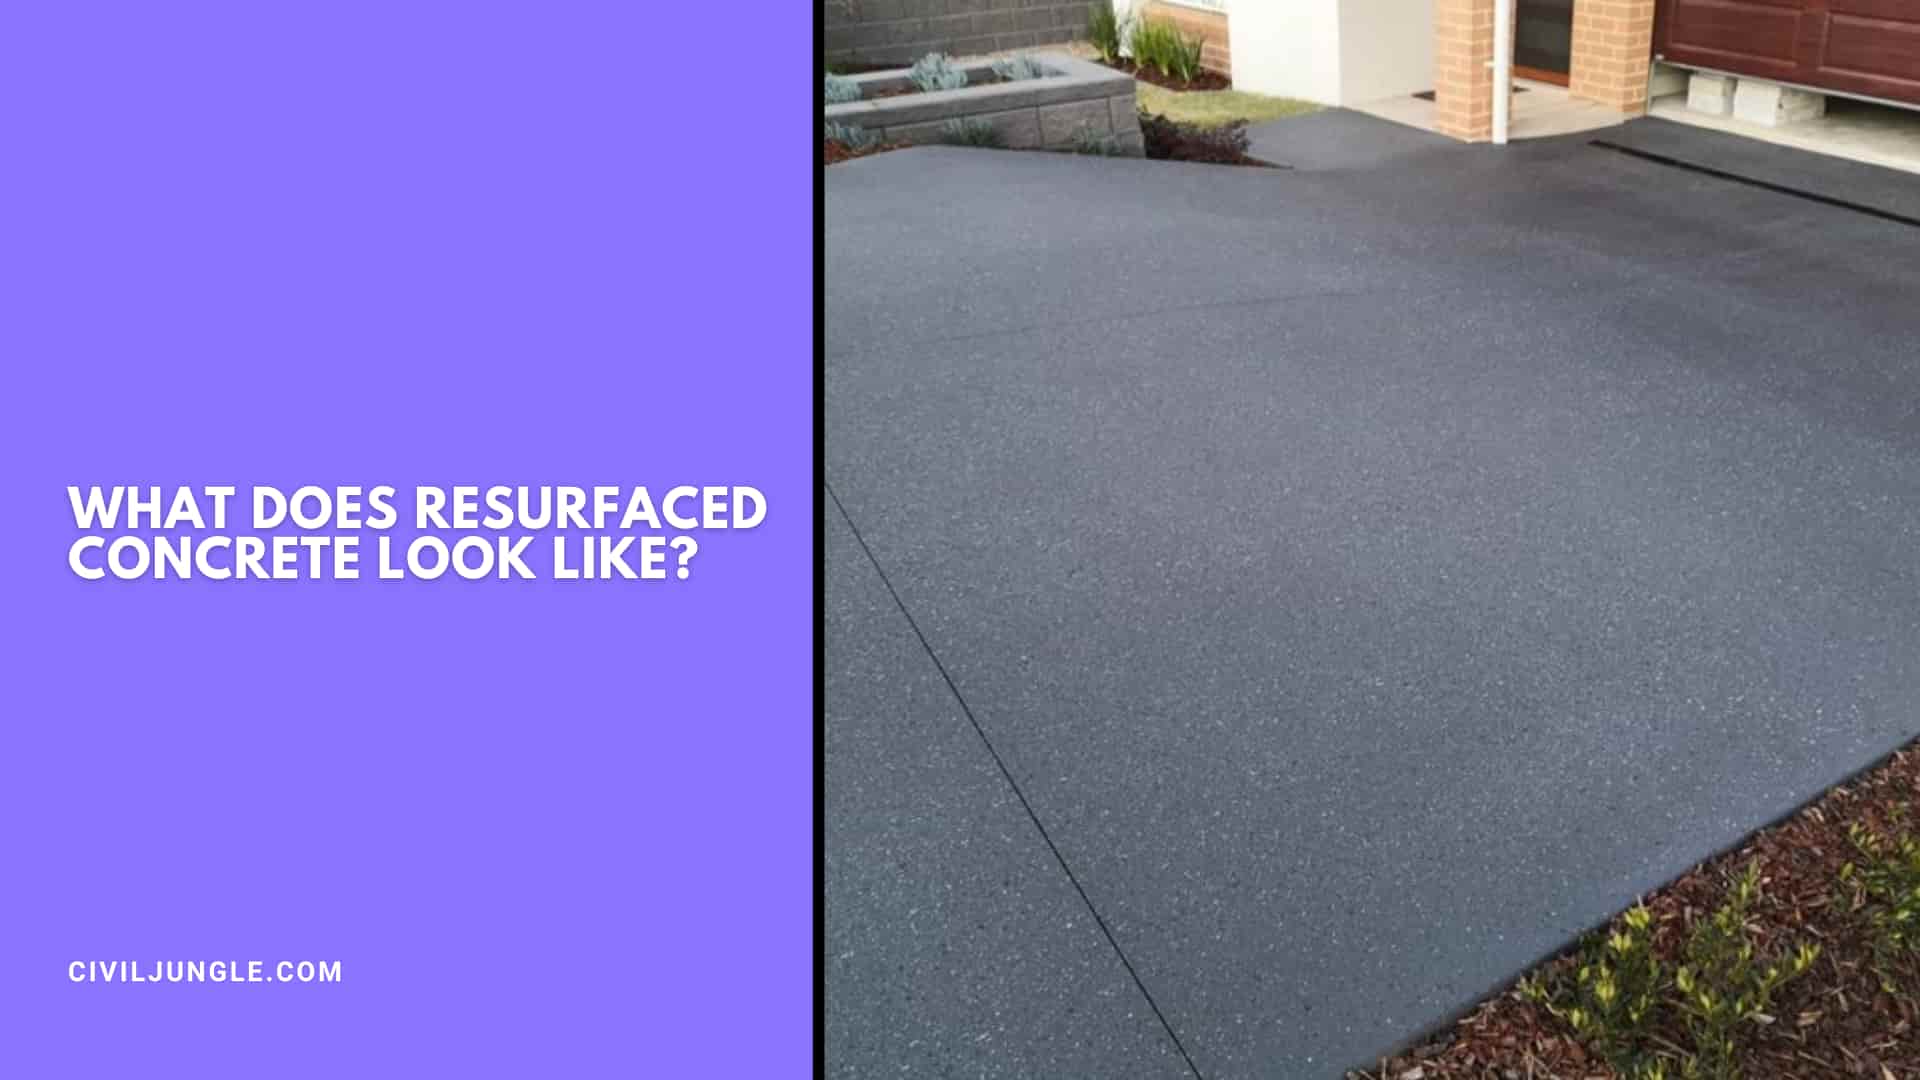 What Does Resurfaced Concrete Look Like?